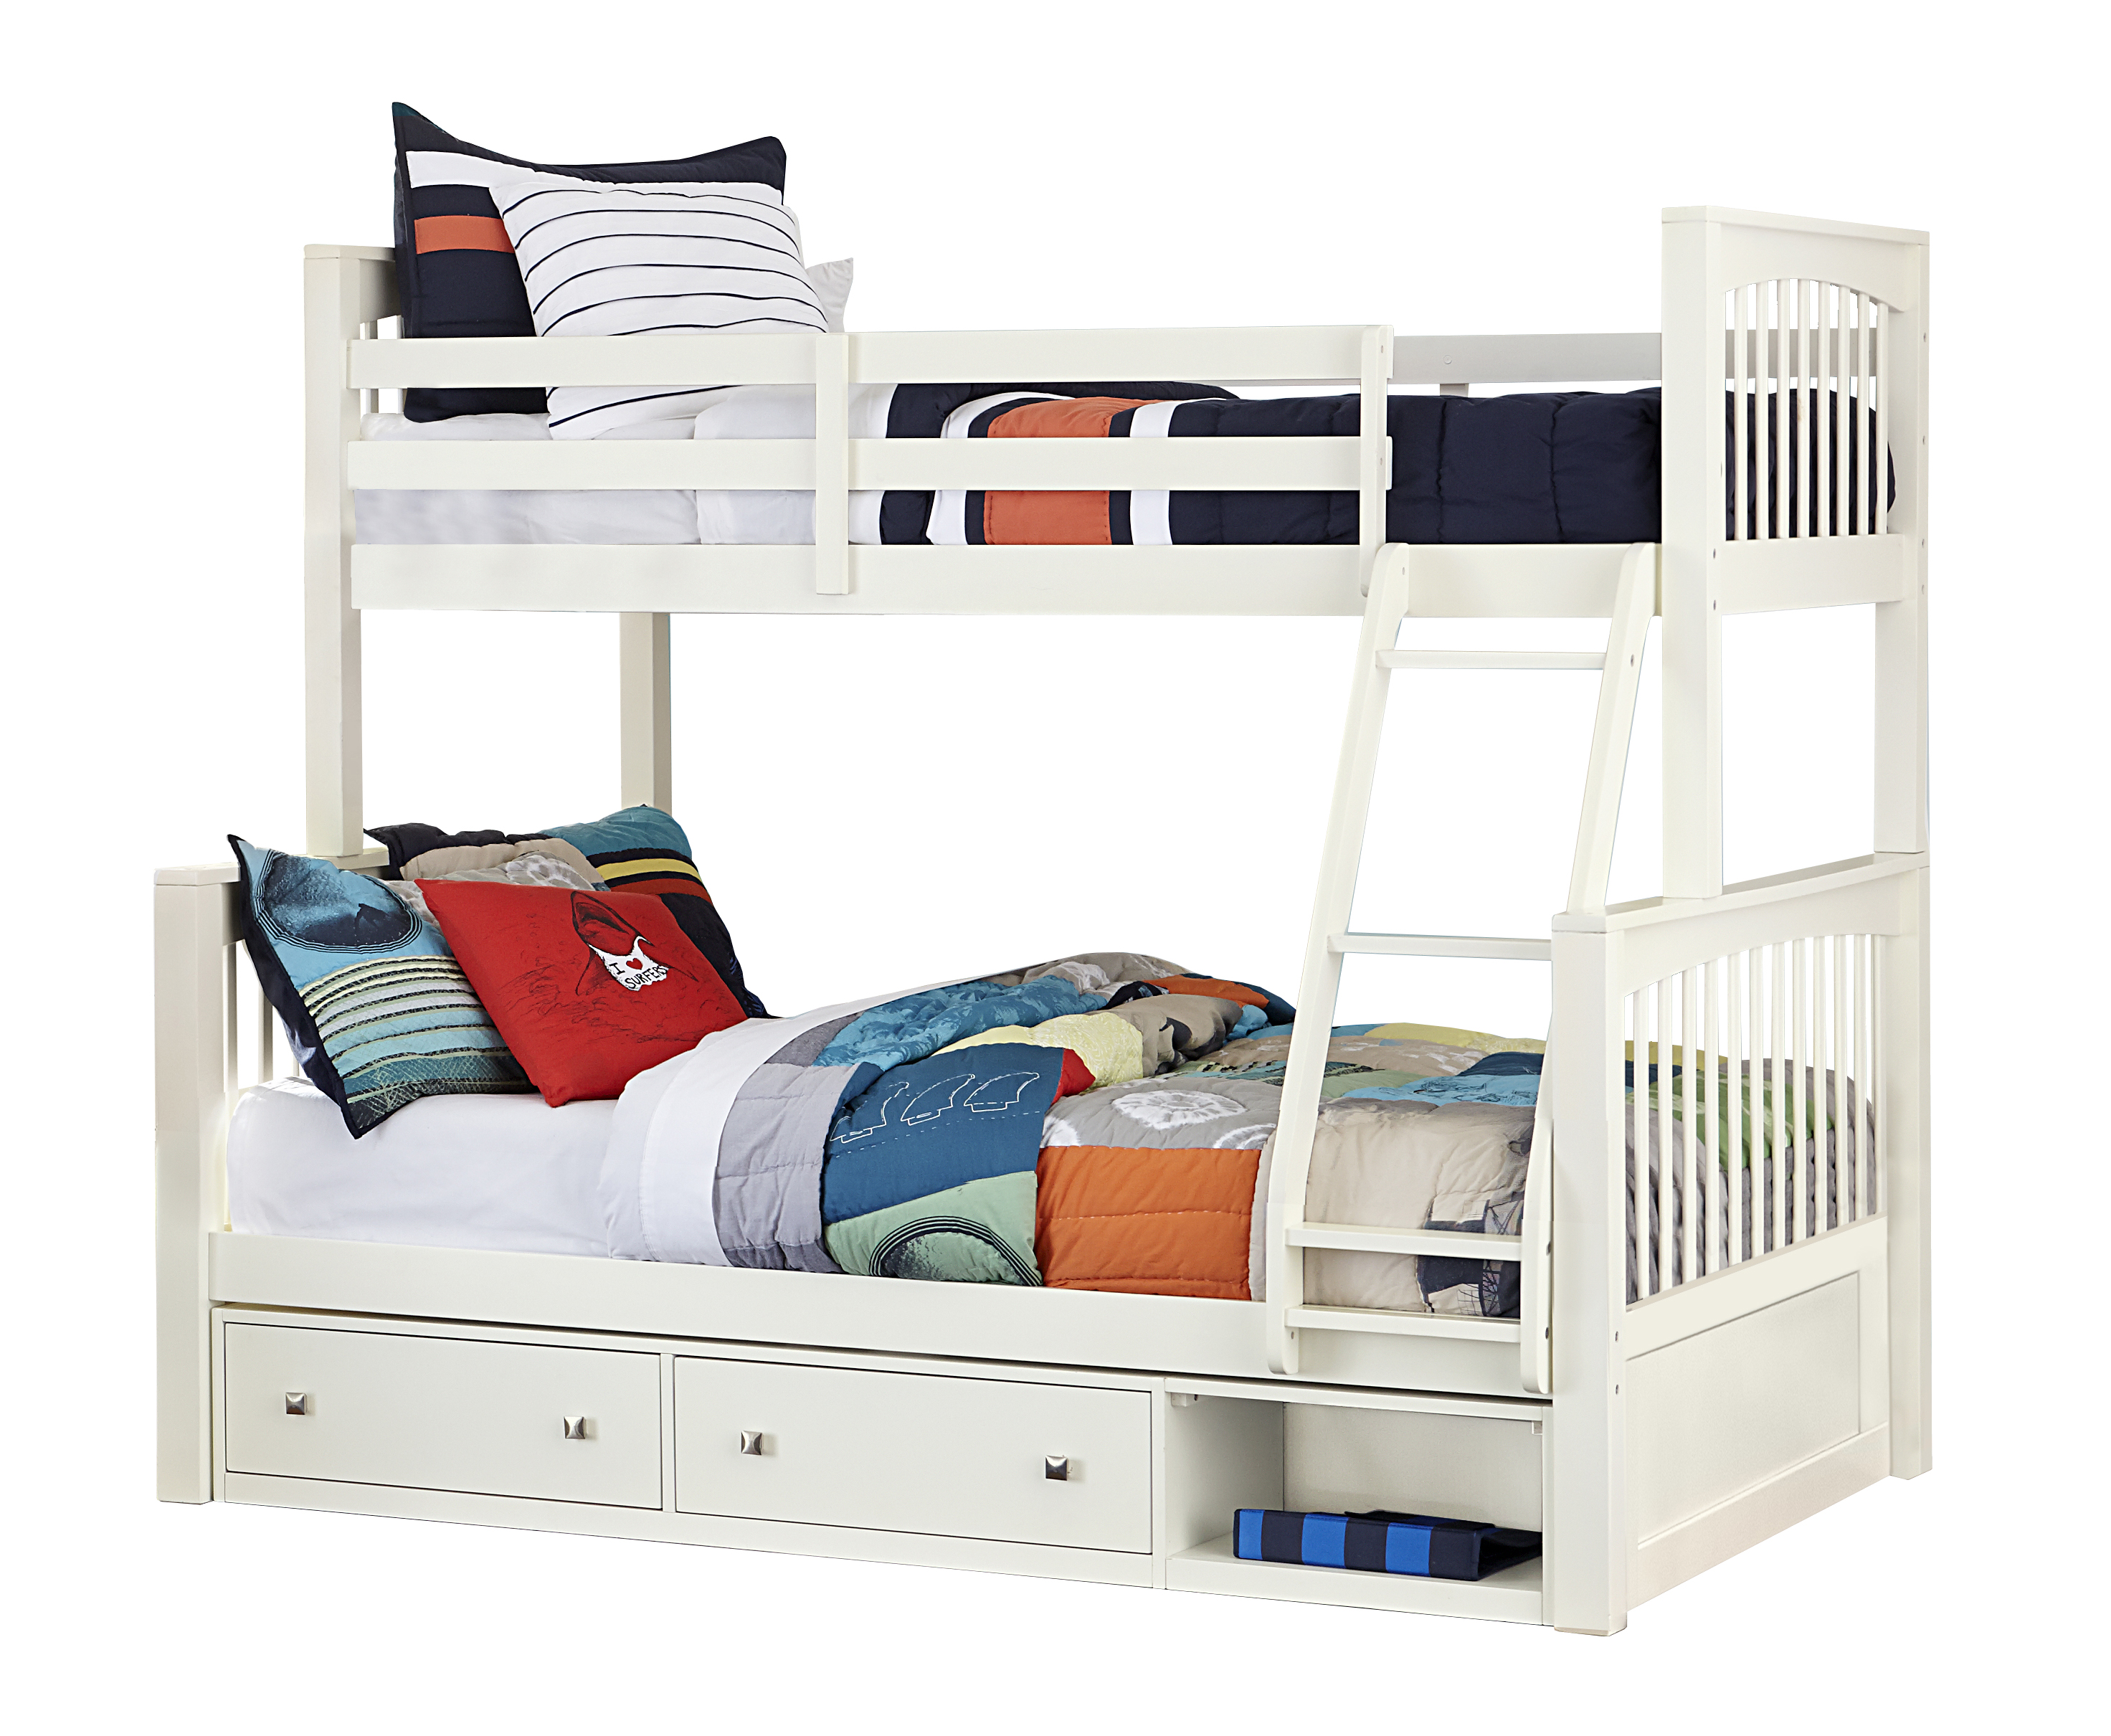 Pulse Wood Bunk Bed with Storage